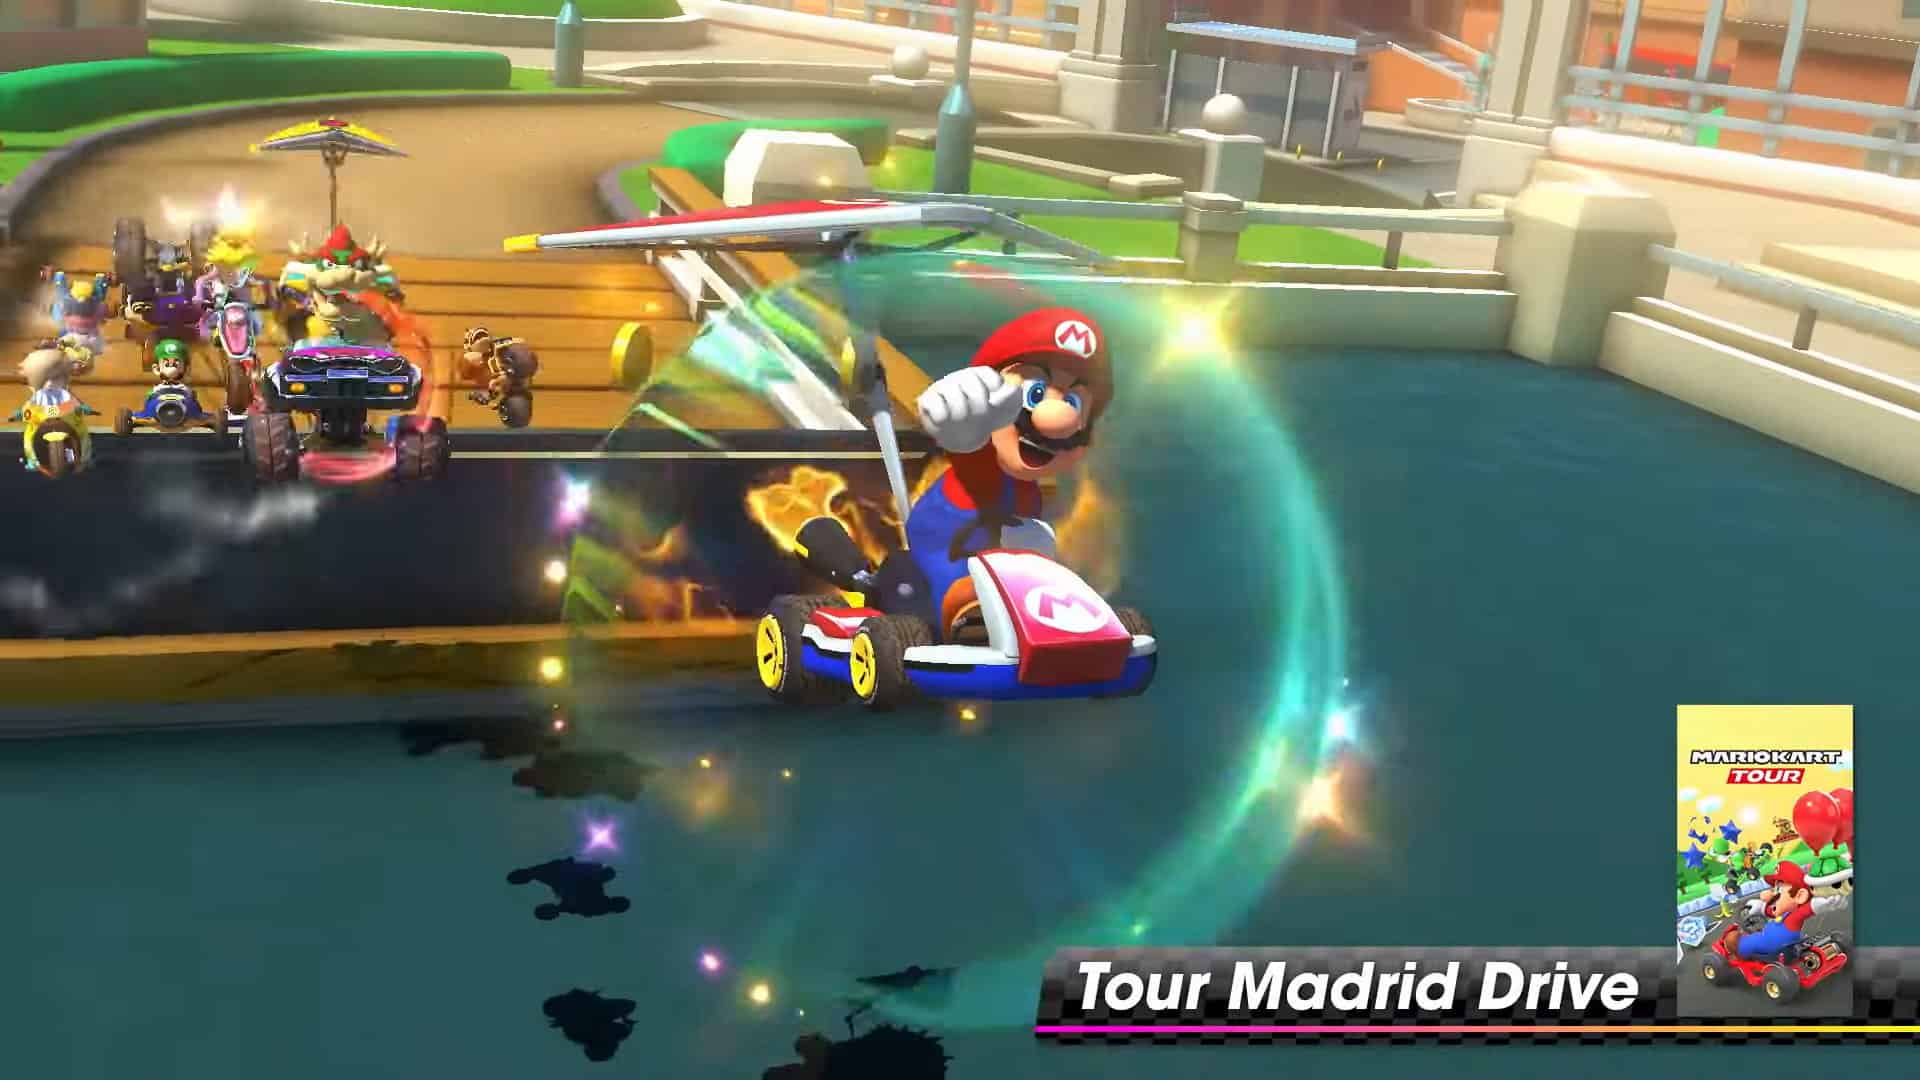 New Mario Kart 8 Deluxe tracks coming 9th November with new characters - My  Nintendo News